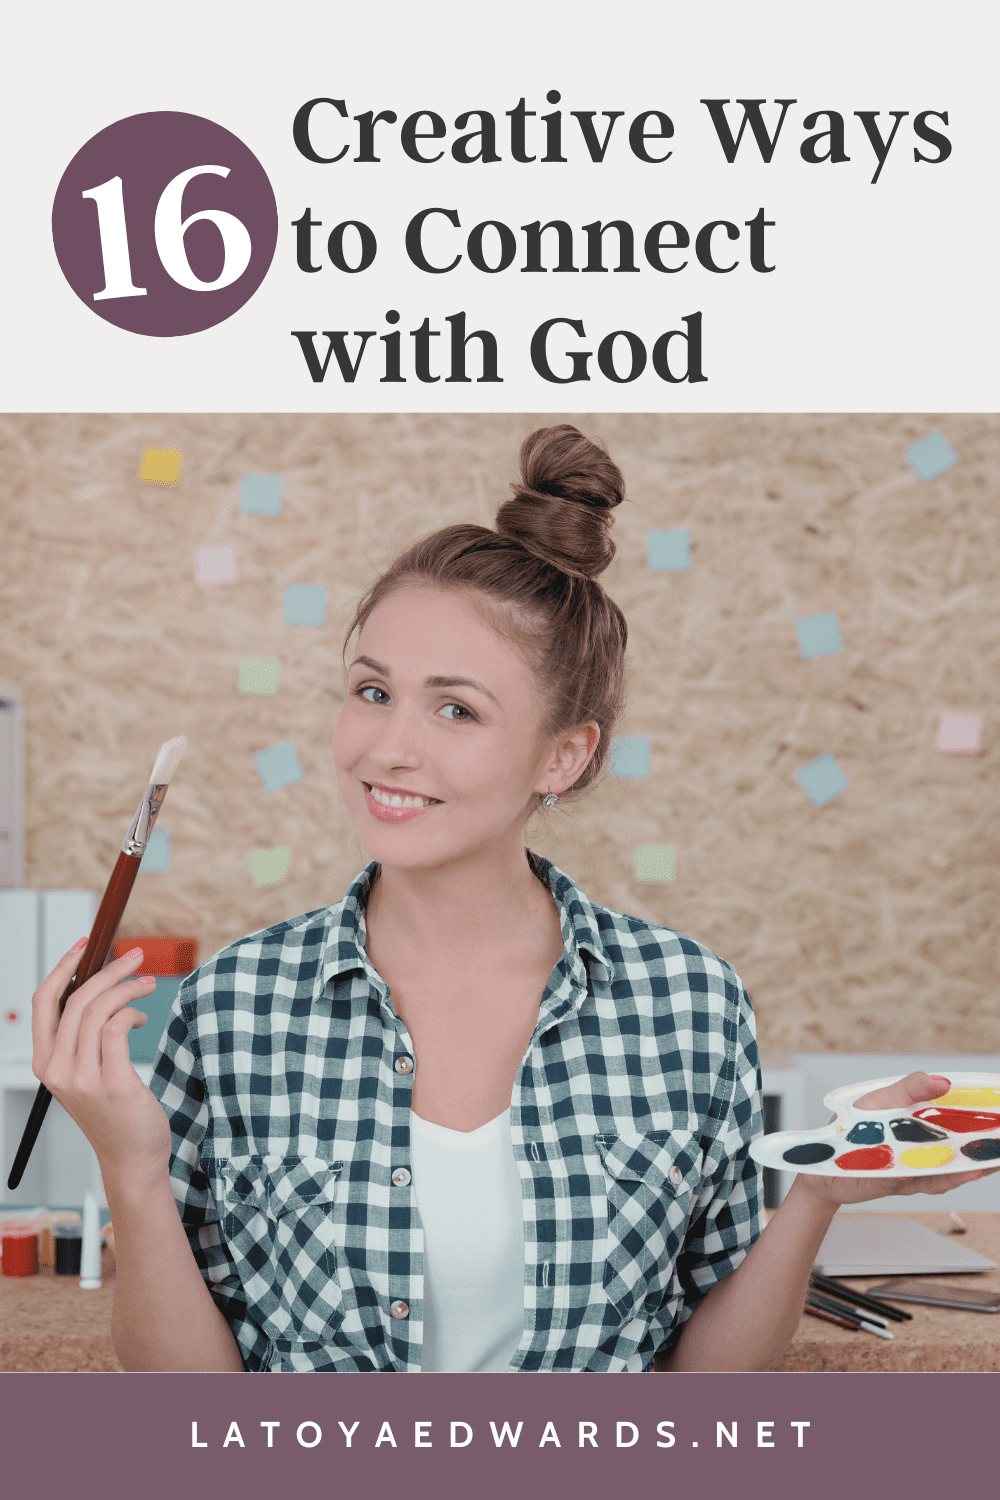 16 Creative ways to connect with God for your quiet time with God. When it comes to a daily quiet time routine, what can you do when you get bored or fall off the wagon? Come learn about these 16 different bible study and prayer suggestions to help you stay consistent in your spiritual growth and breathe new life into your relationship with God.